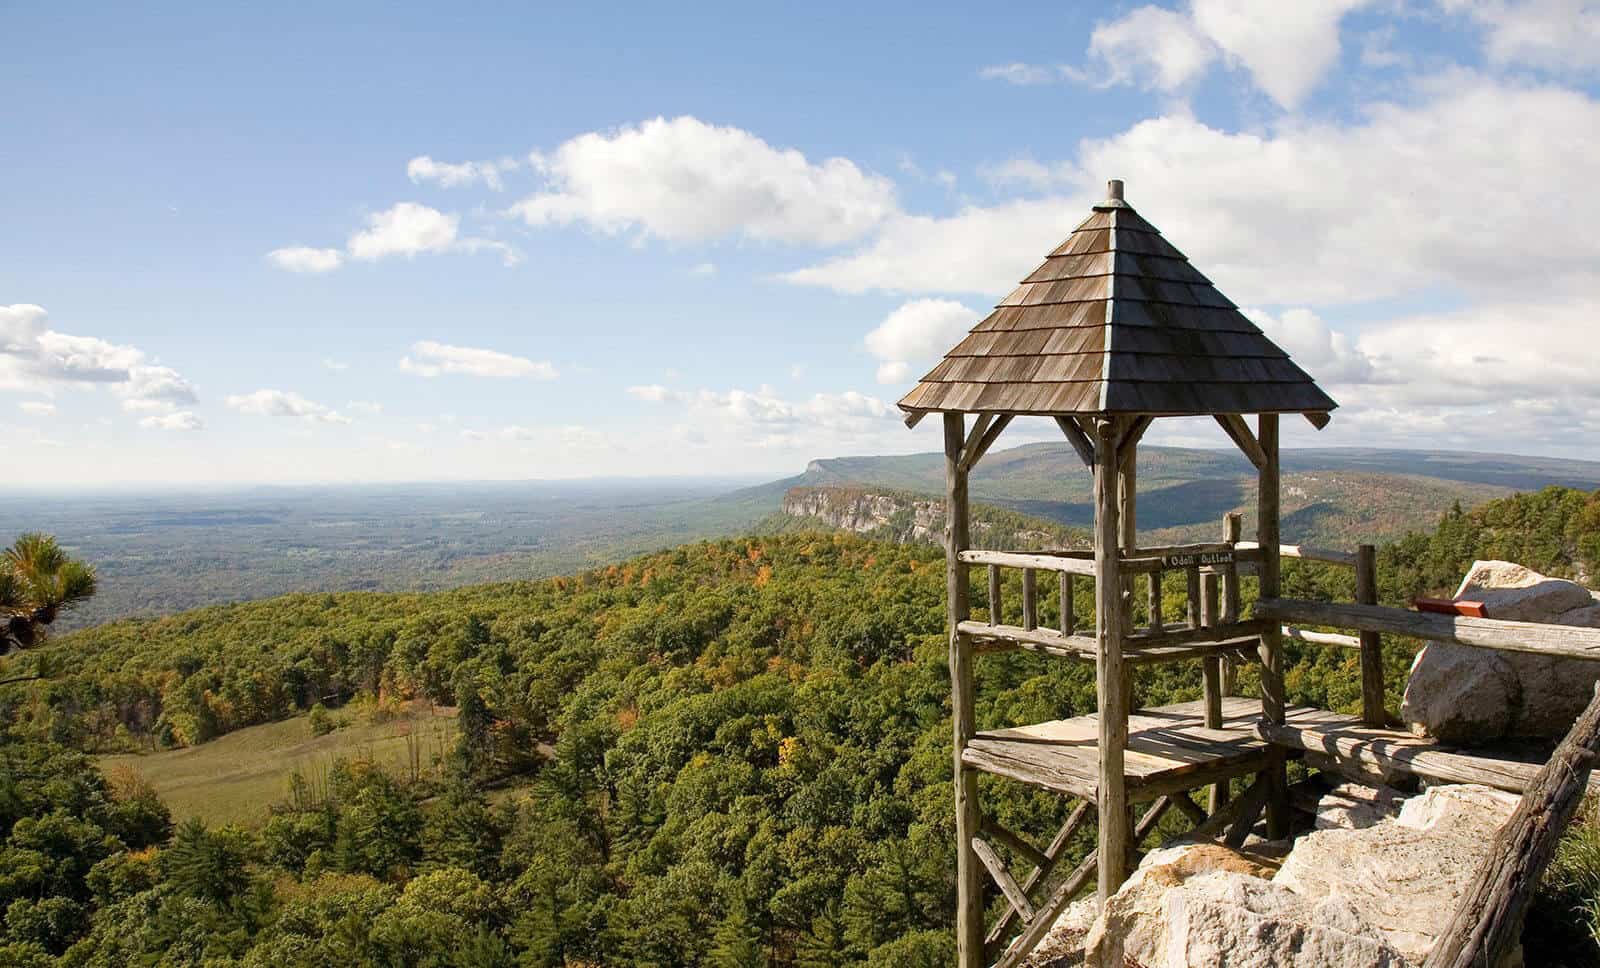 Summerhouse at Mohonk Mountain House